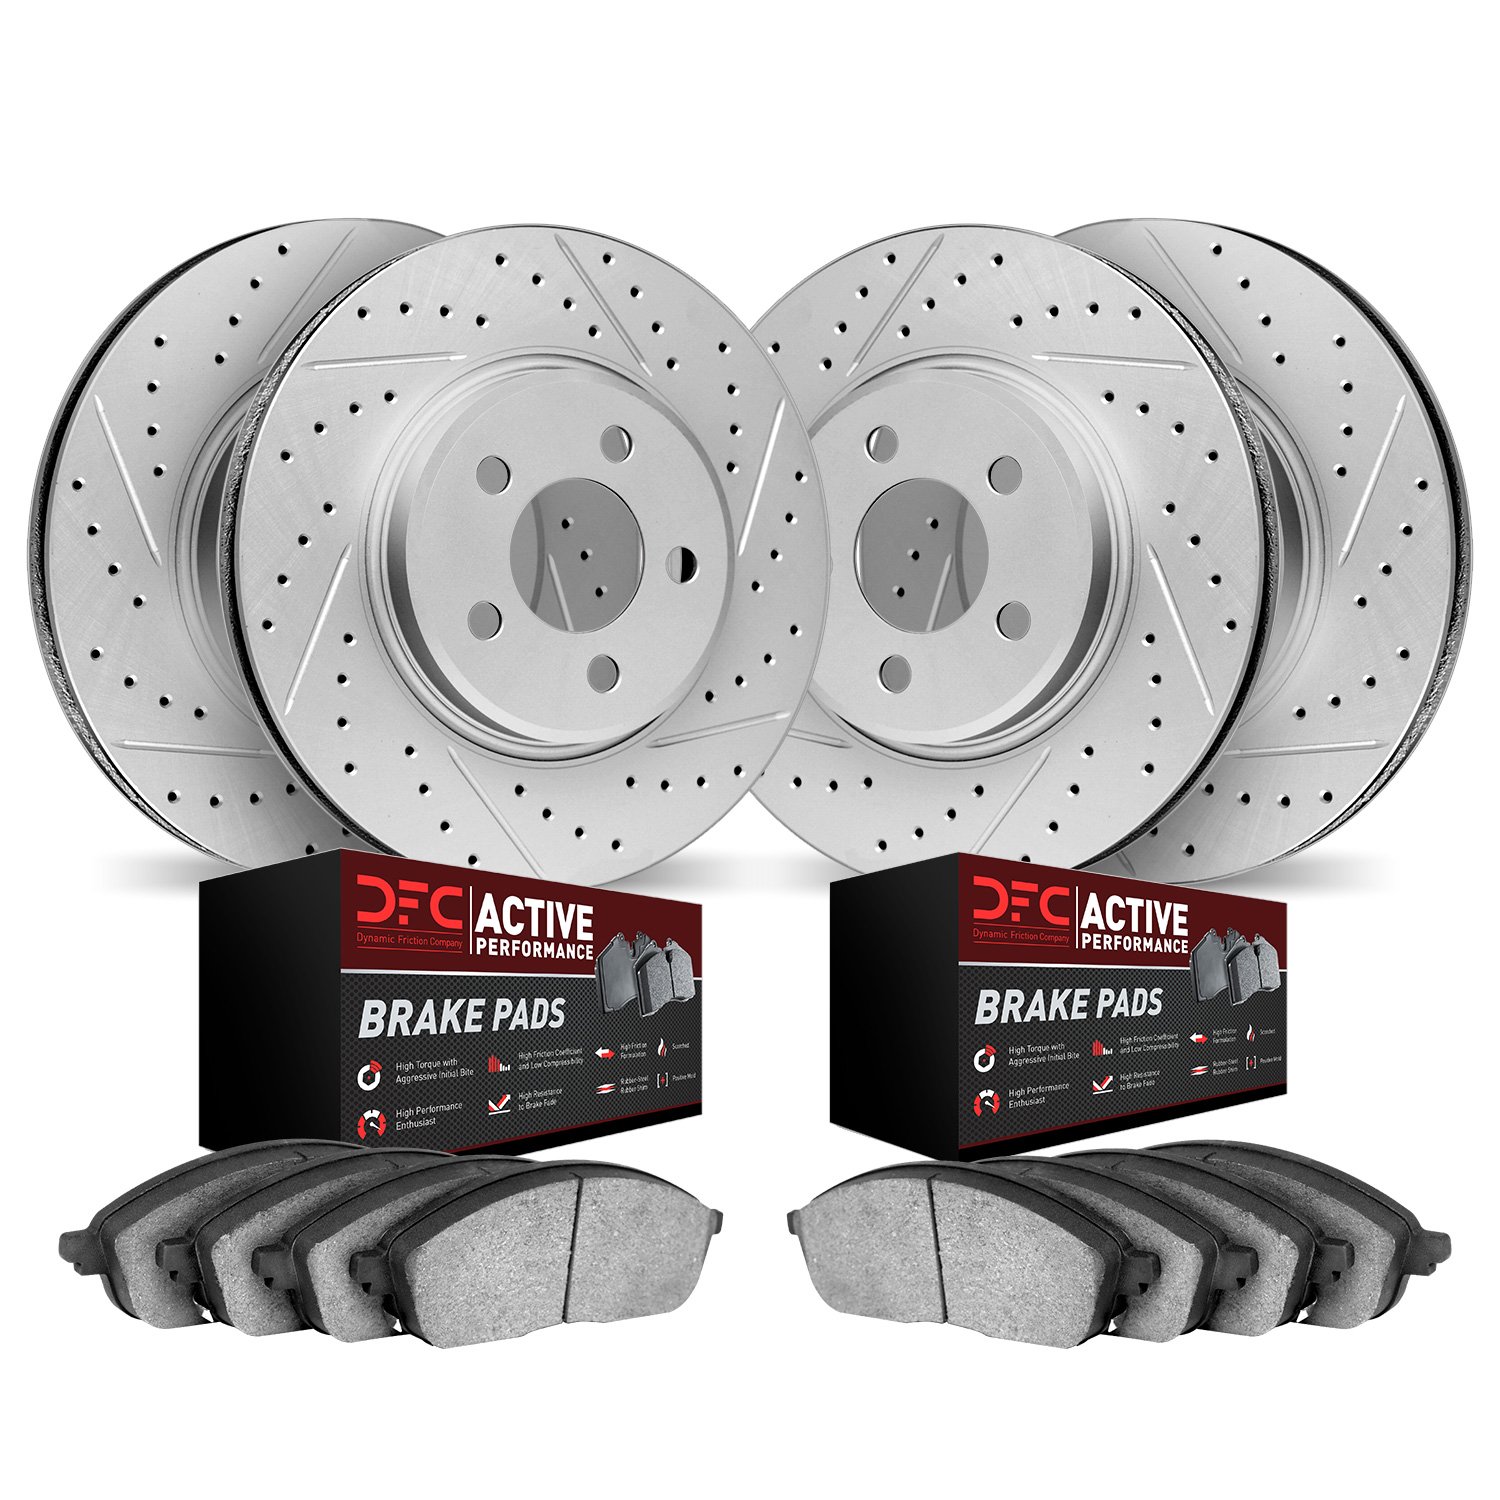 2704-54018 Geoperformance Drilled/Slotted Brake Rotors with Active Performance Pads Kit, 2007-2014 Ford/Lincoln/Mercury/Mazda, P